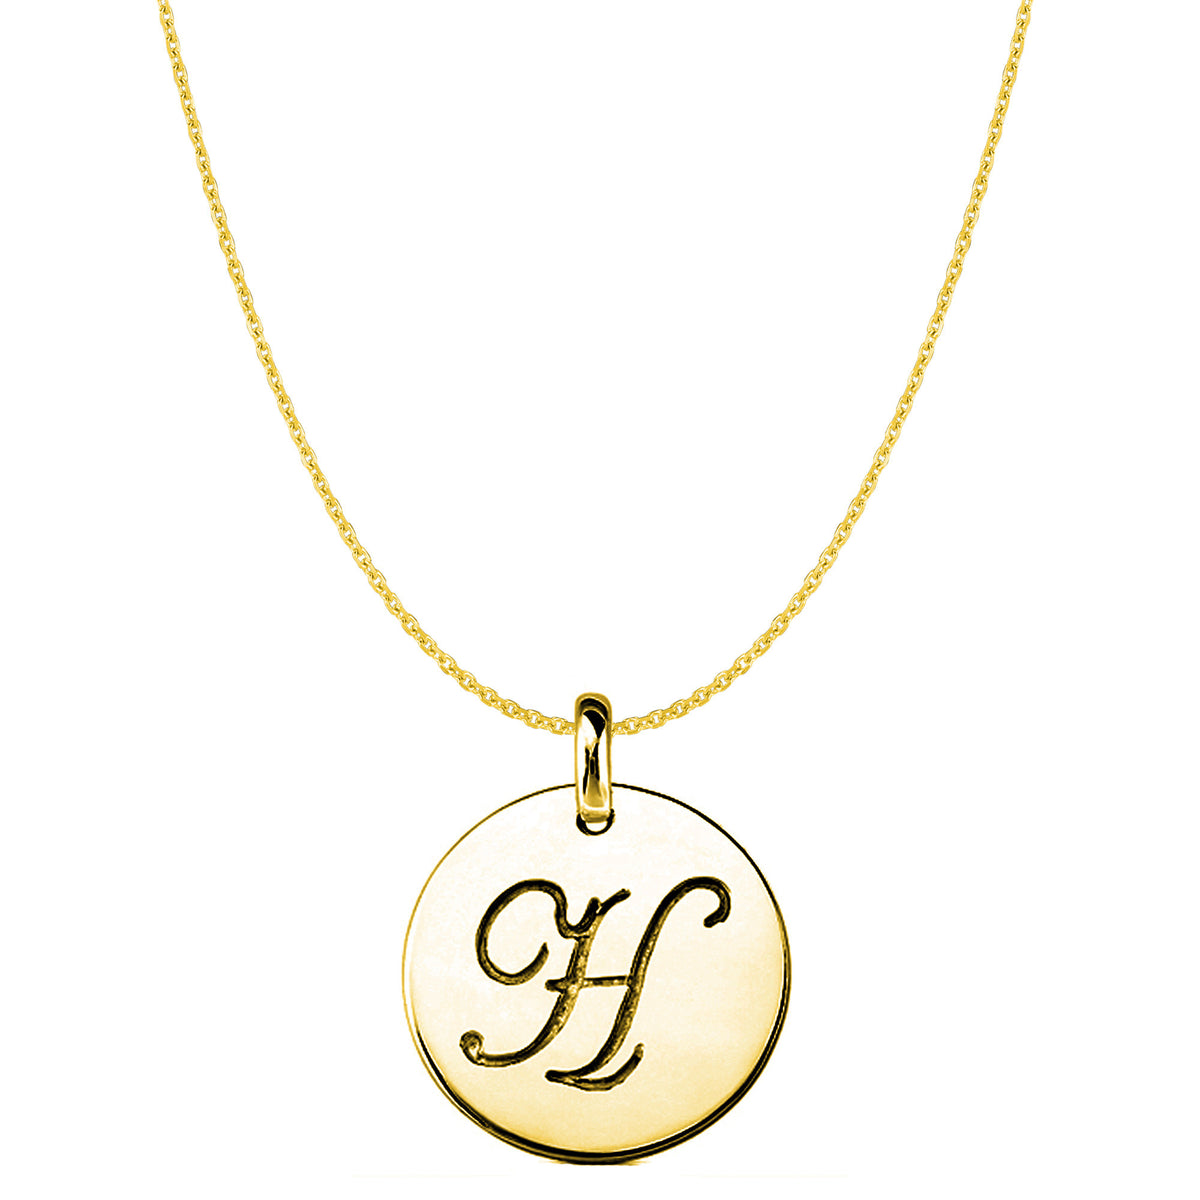 "H" 14K Yellow Gold Script Engraved Initial Disk Pendant fine designer jewelry for men and women